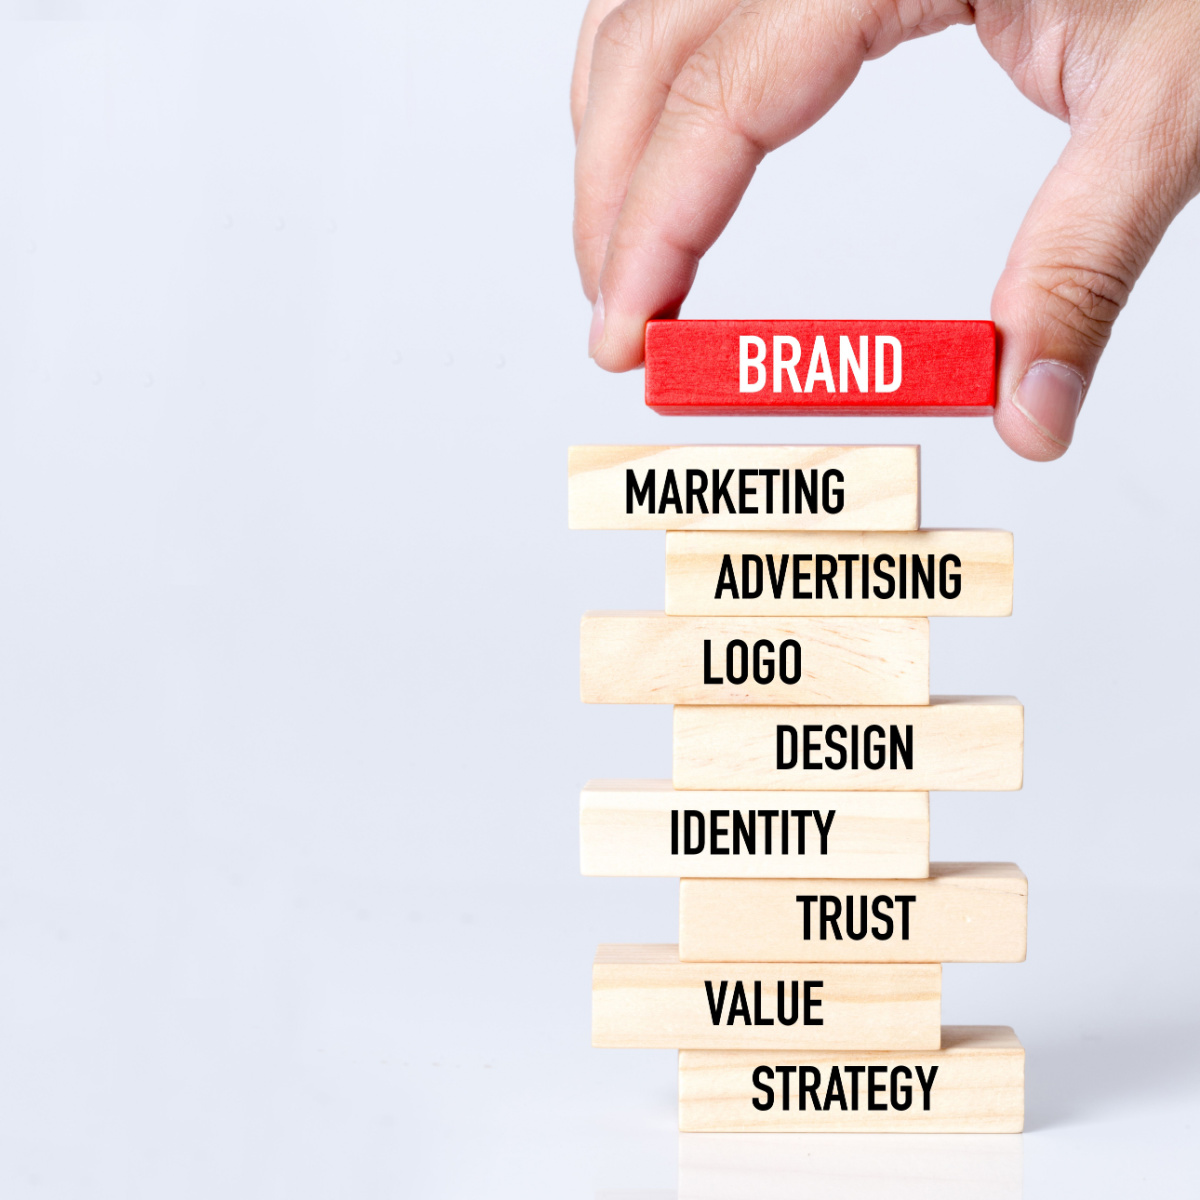 Brand First Marketing is a Houston marketing strategy that recognizes that a strong brand is the foundation upon which successful marketing campaigns are built.